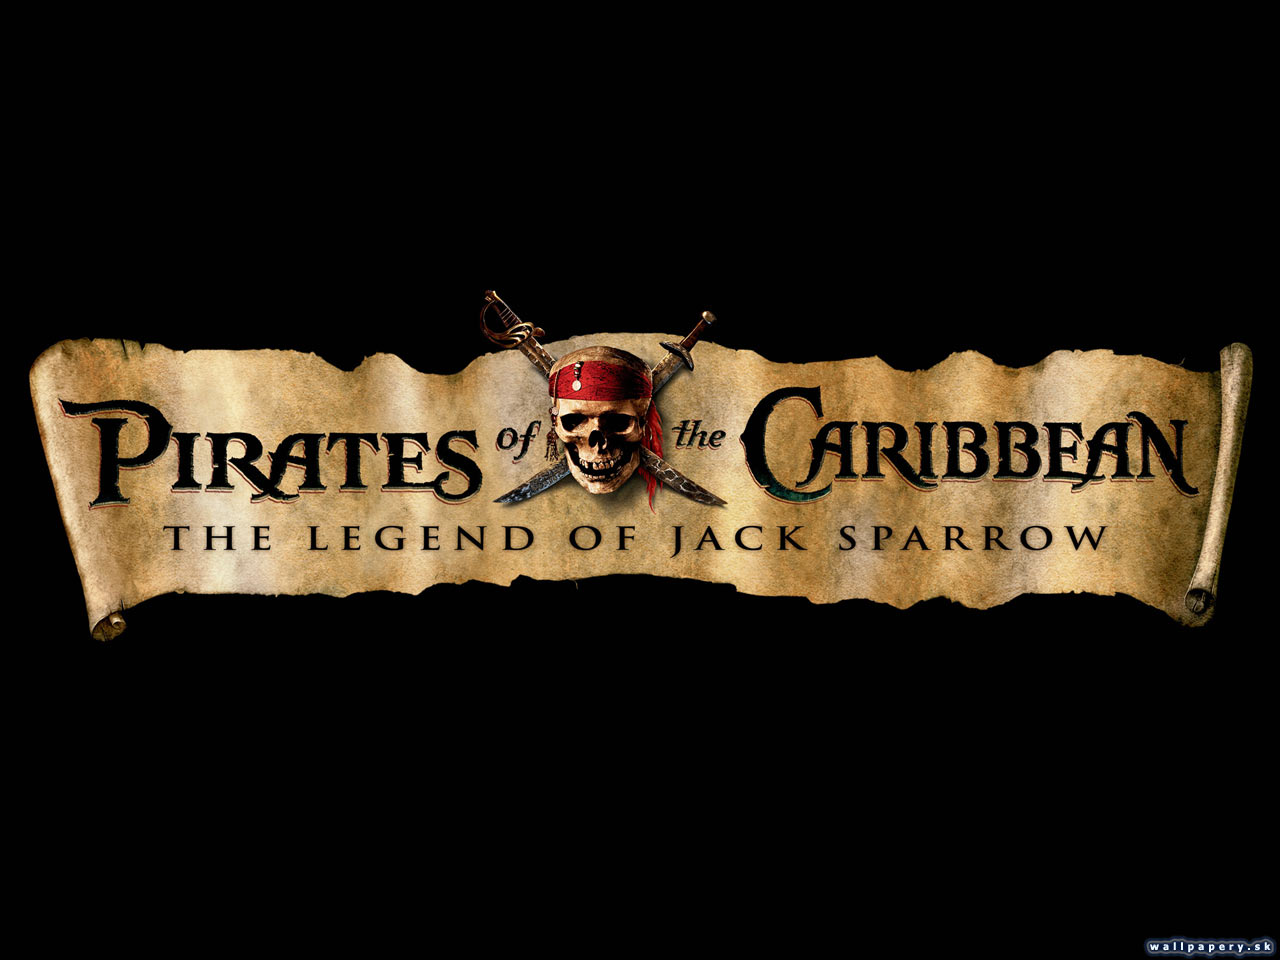 Pirates of the Caribbean: The Legend of Jack Sparrow - wallpaper 2